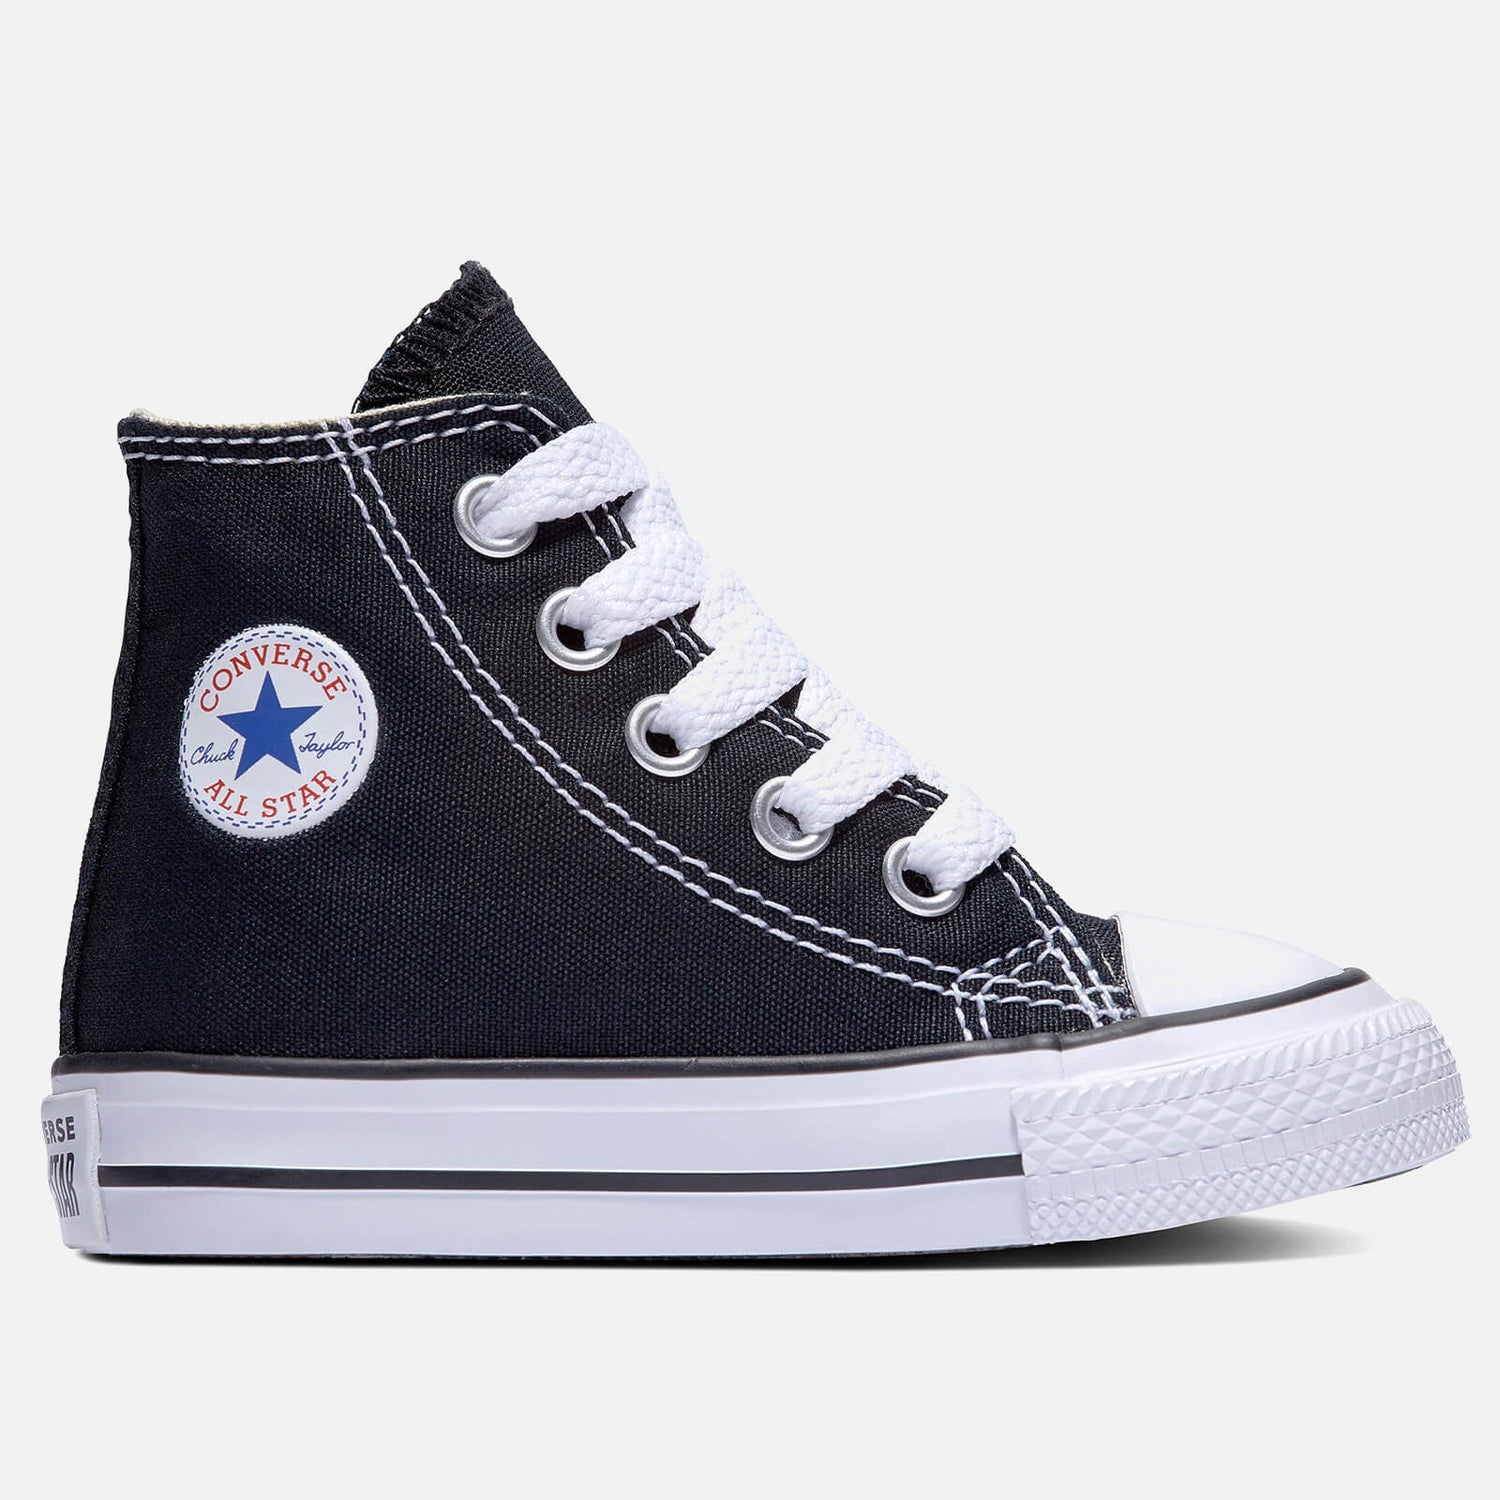 Converse Toddlers' Chuck Taylor All Star Hi - Top Tainers - Black - UK 2 Toddler